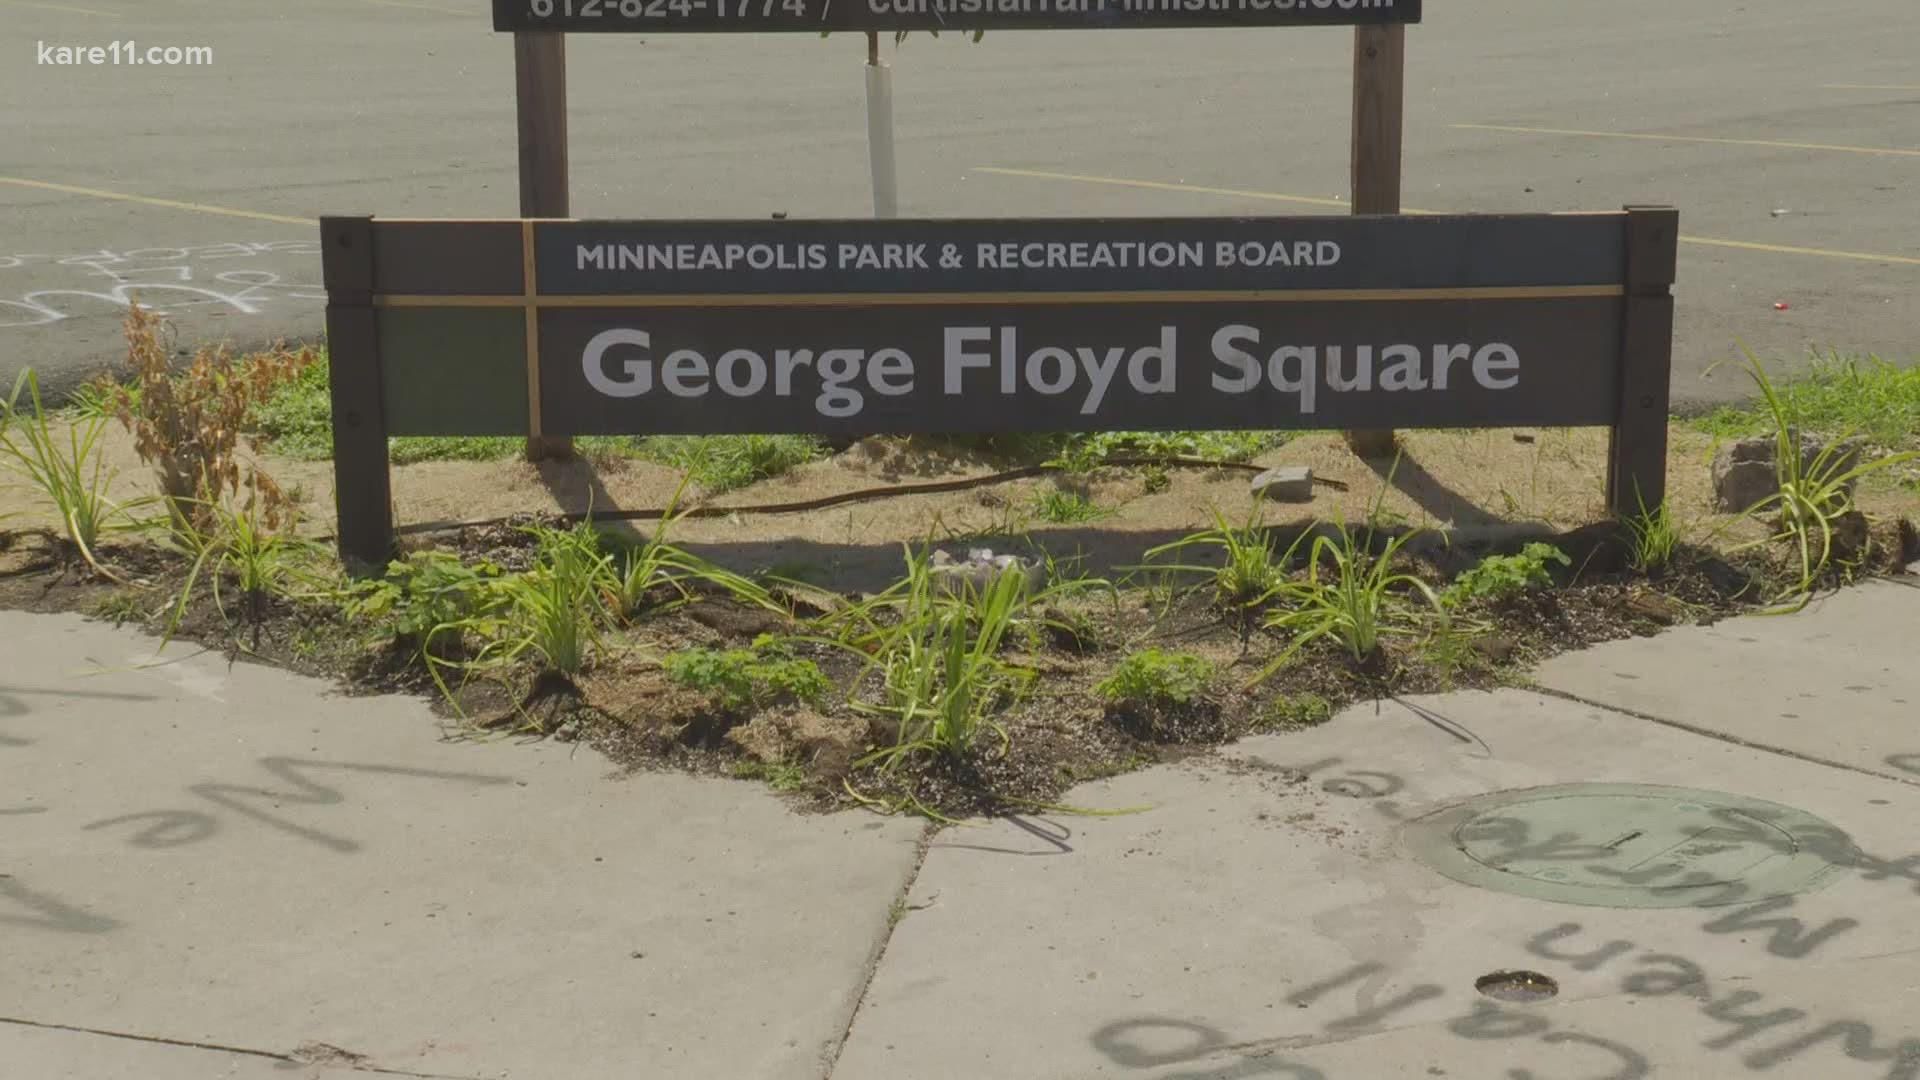 Months after George Floyd's death, the intersection where he died is still blocked off as a dedicated memorial.